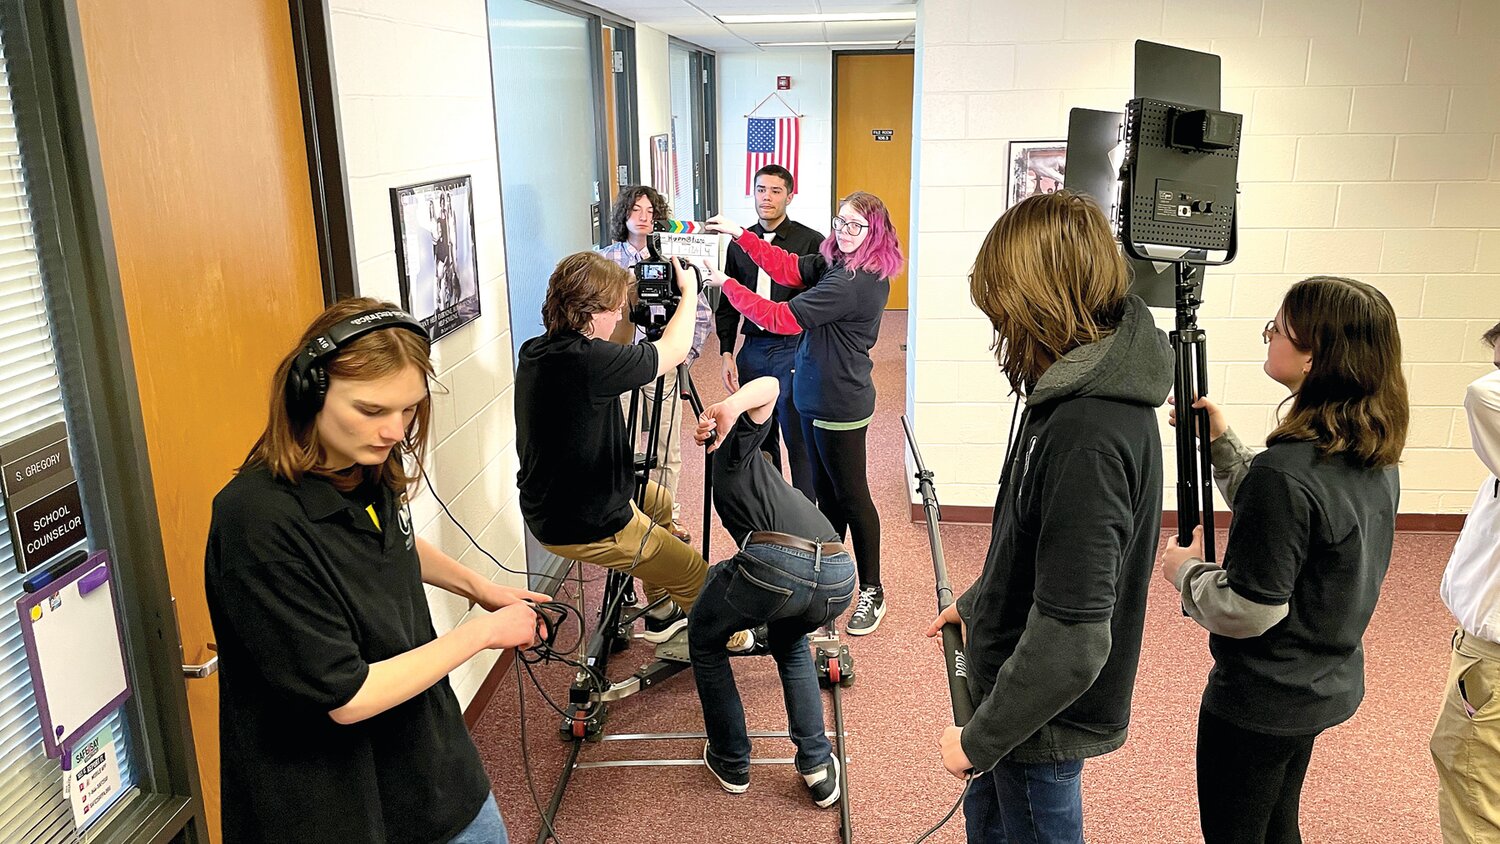 Multimedia technology students from Middle Bucks Institute of Technology during production for the Greenfield Youth Film Festival.